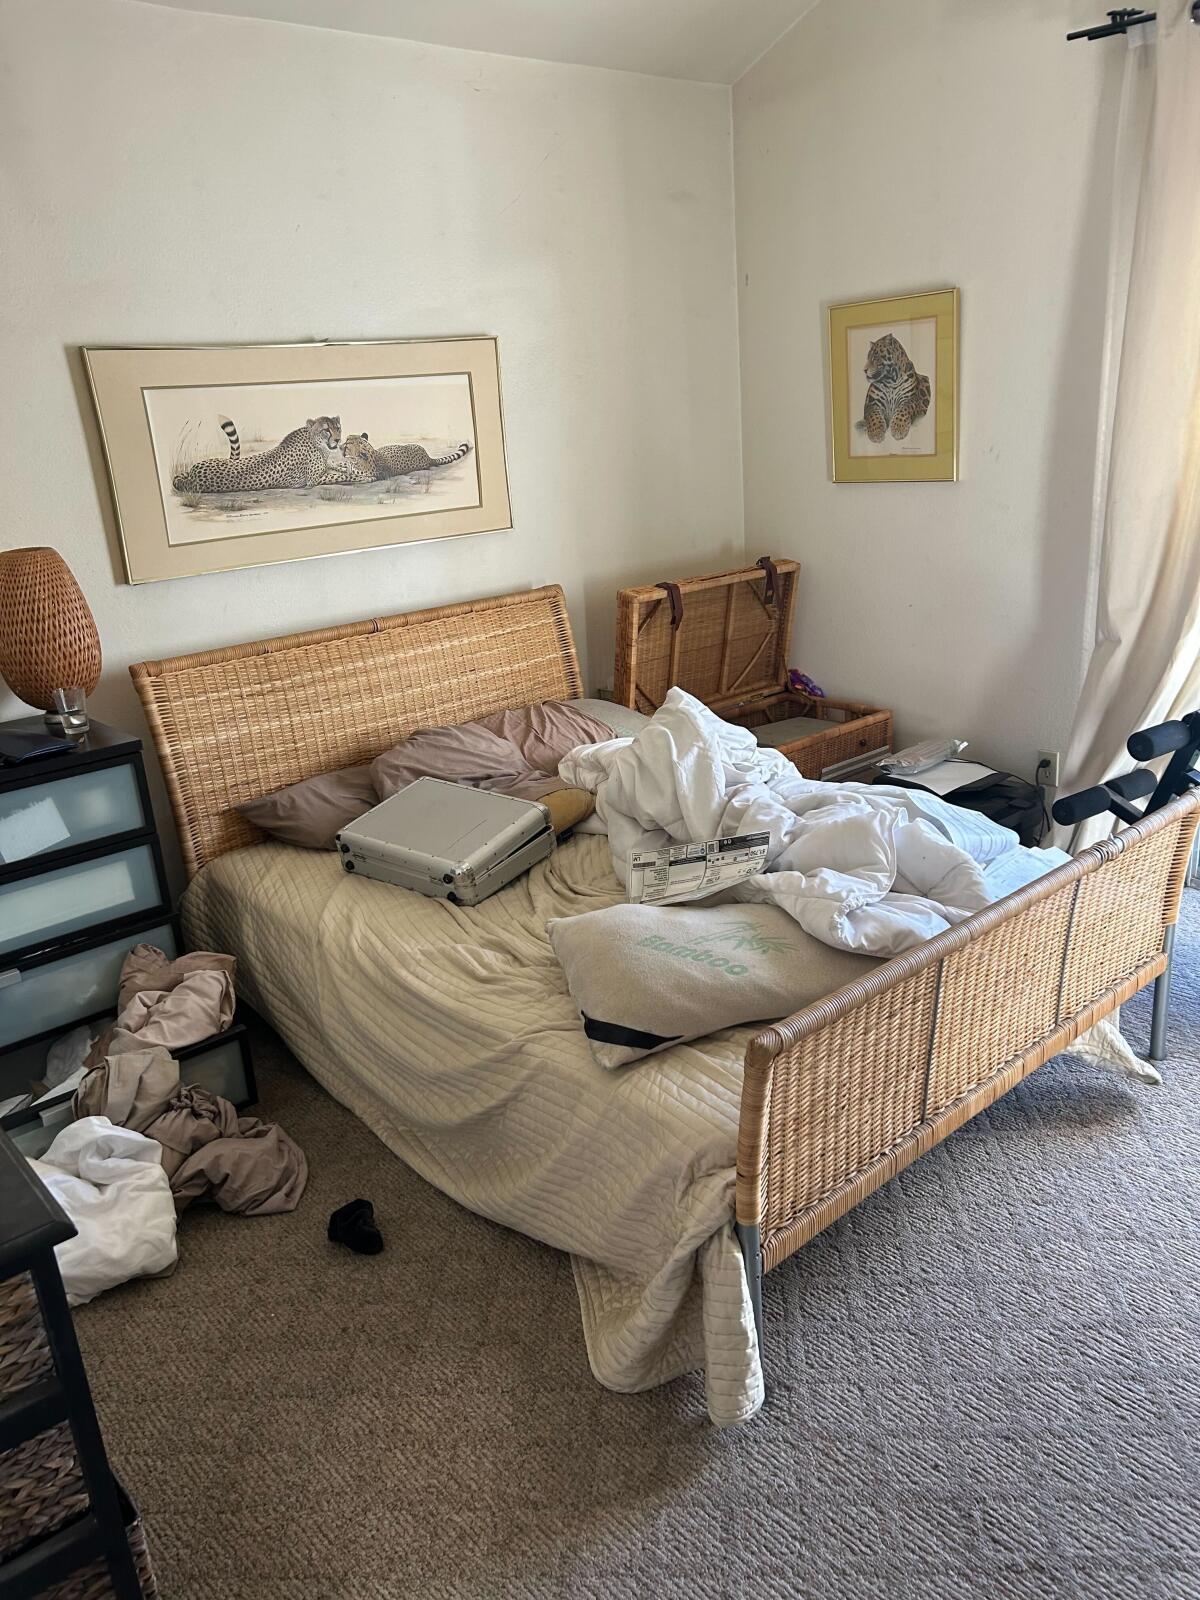 A bedroom after a search by the Los Angeles police.